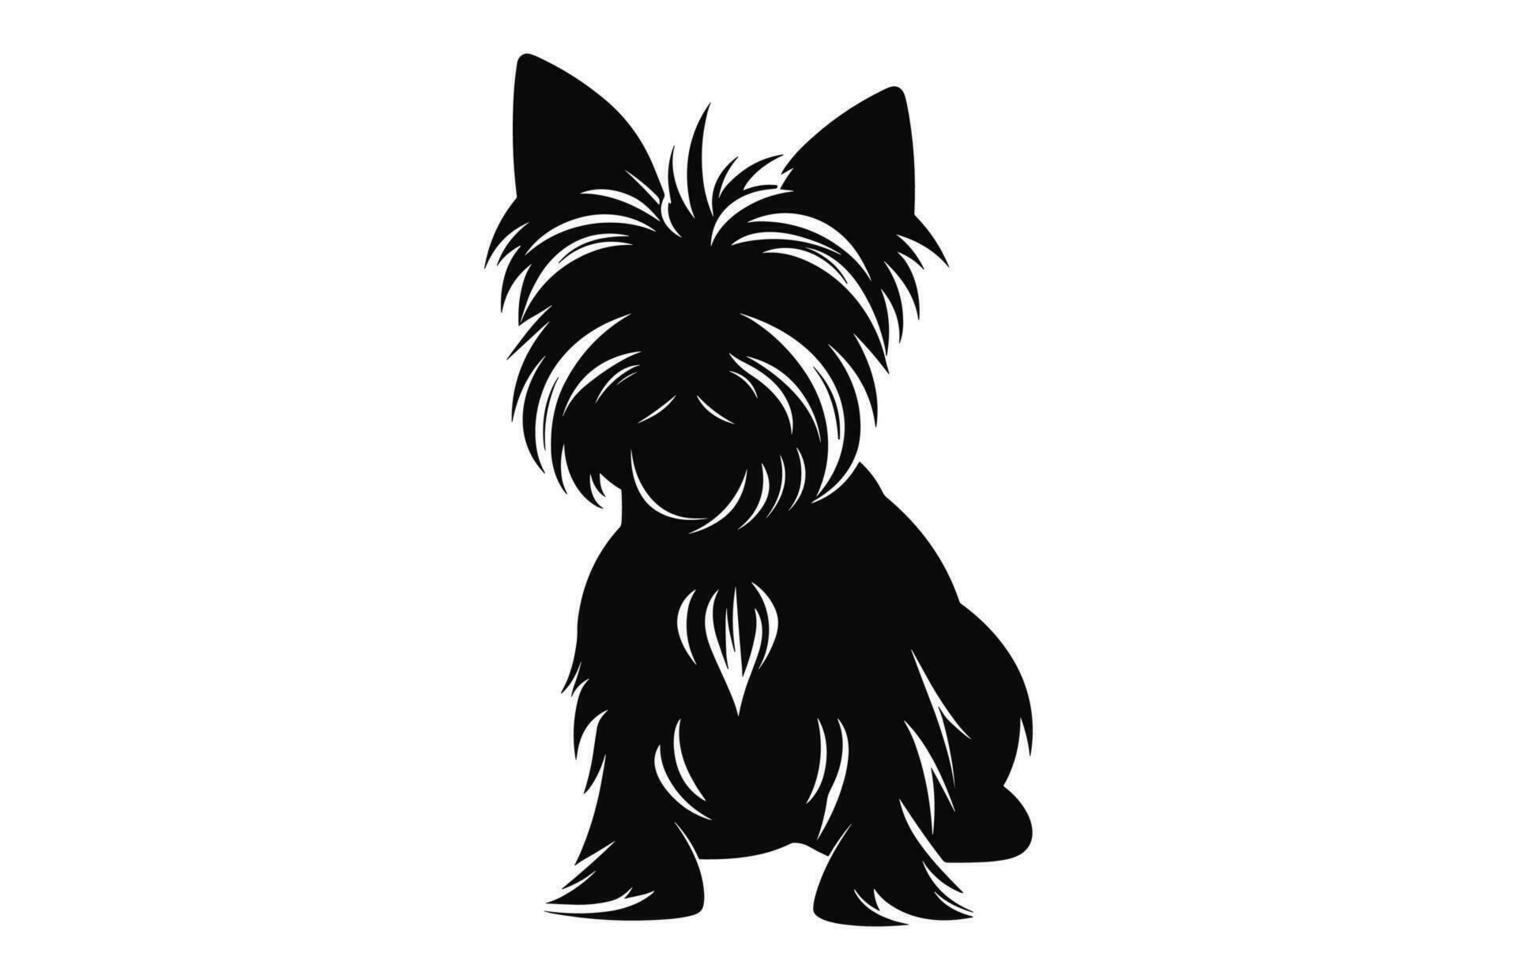 Yorkshire Terrier Dog Vector black Silhouette isolated on a white background